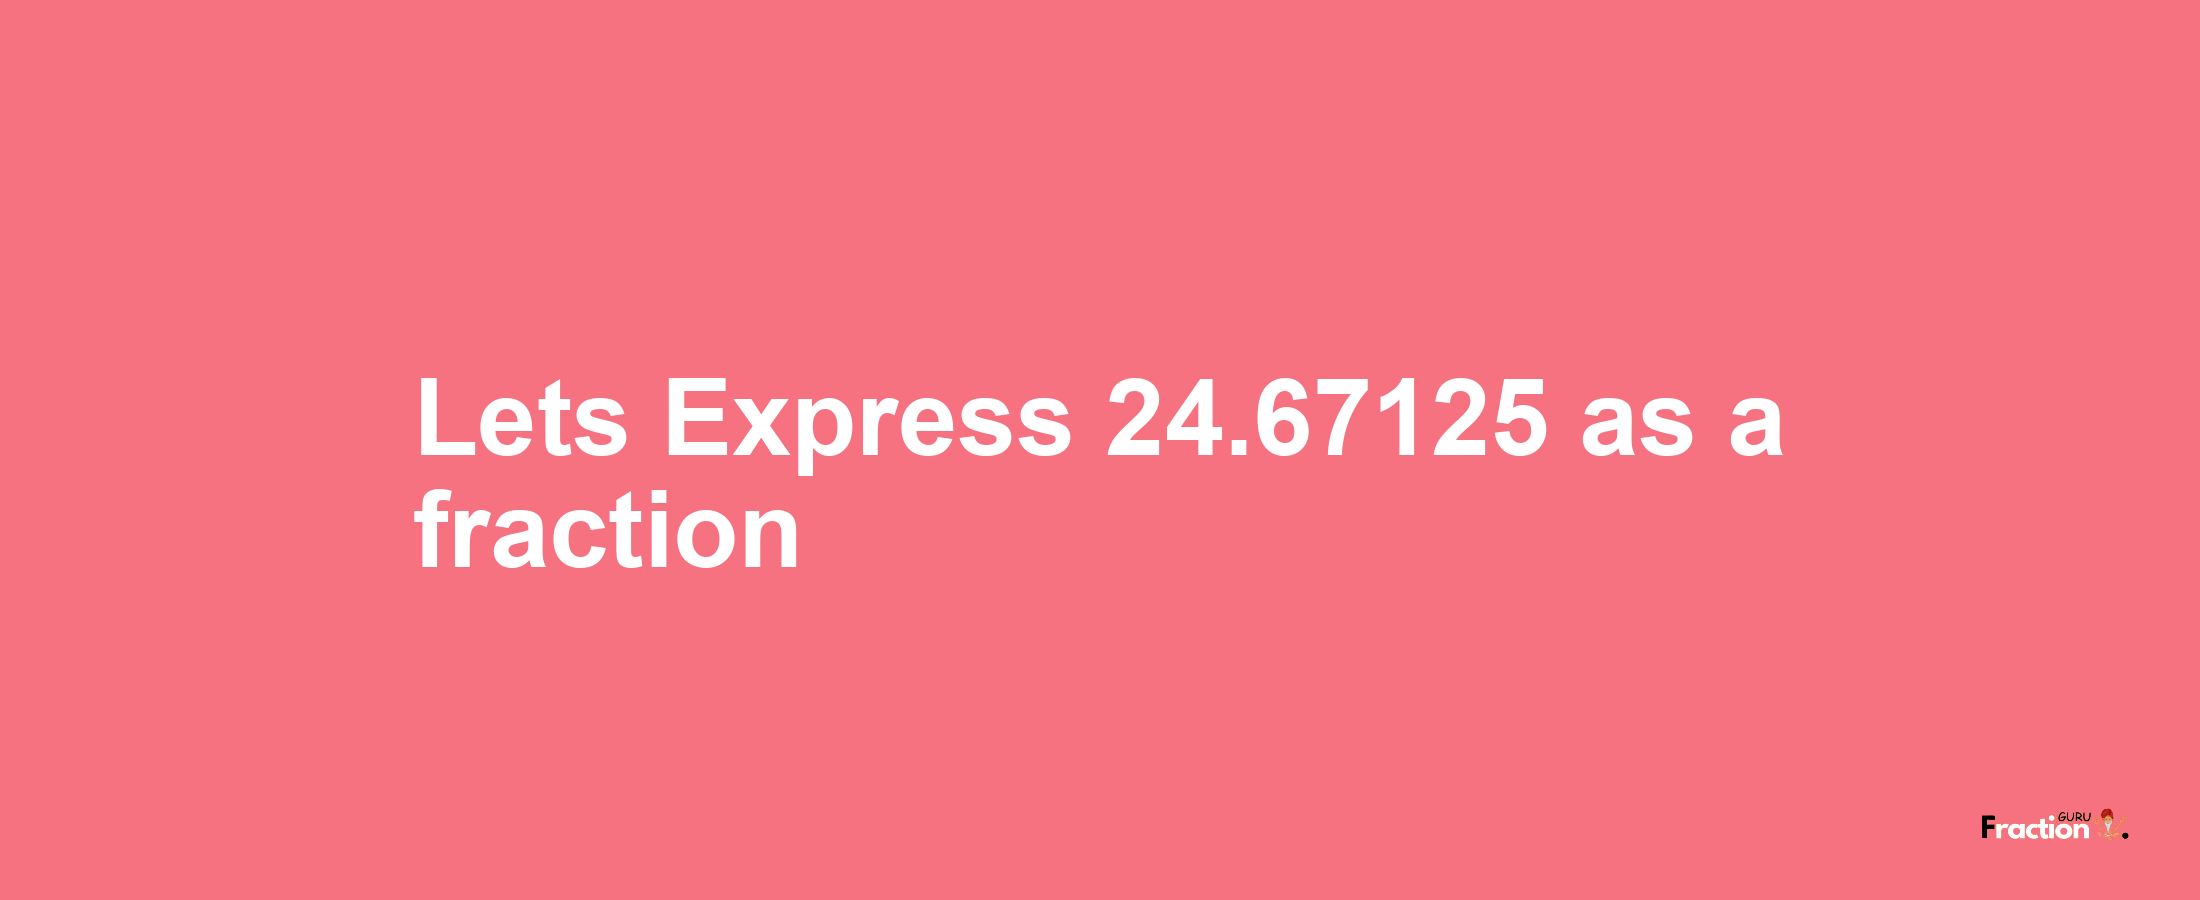 Lets Express 24.67125 as afraction